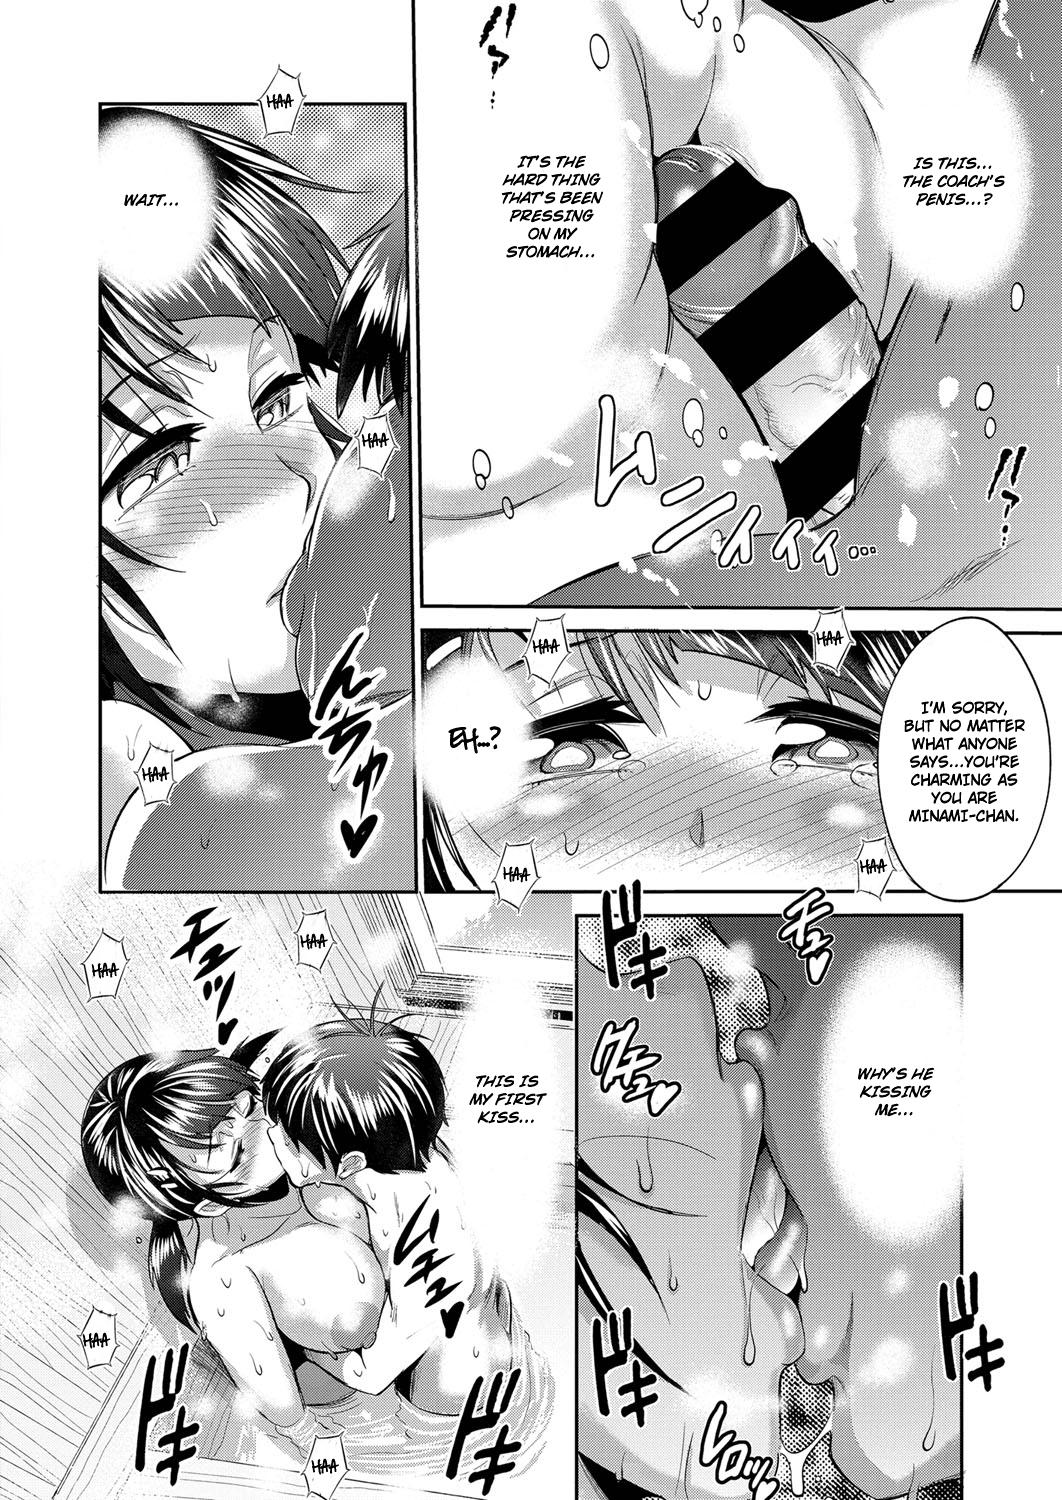 [DISTANCE] Joshi Lacu! - Girls Lacrosse Club ~2 Years Later~ Ch. 2 (COMIC ExE 03) [English] [TripleSevenScans] [Digital] 19